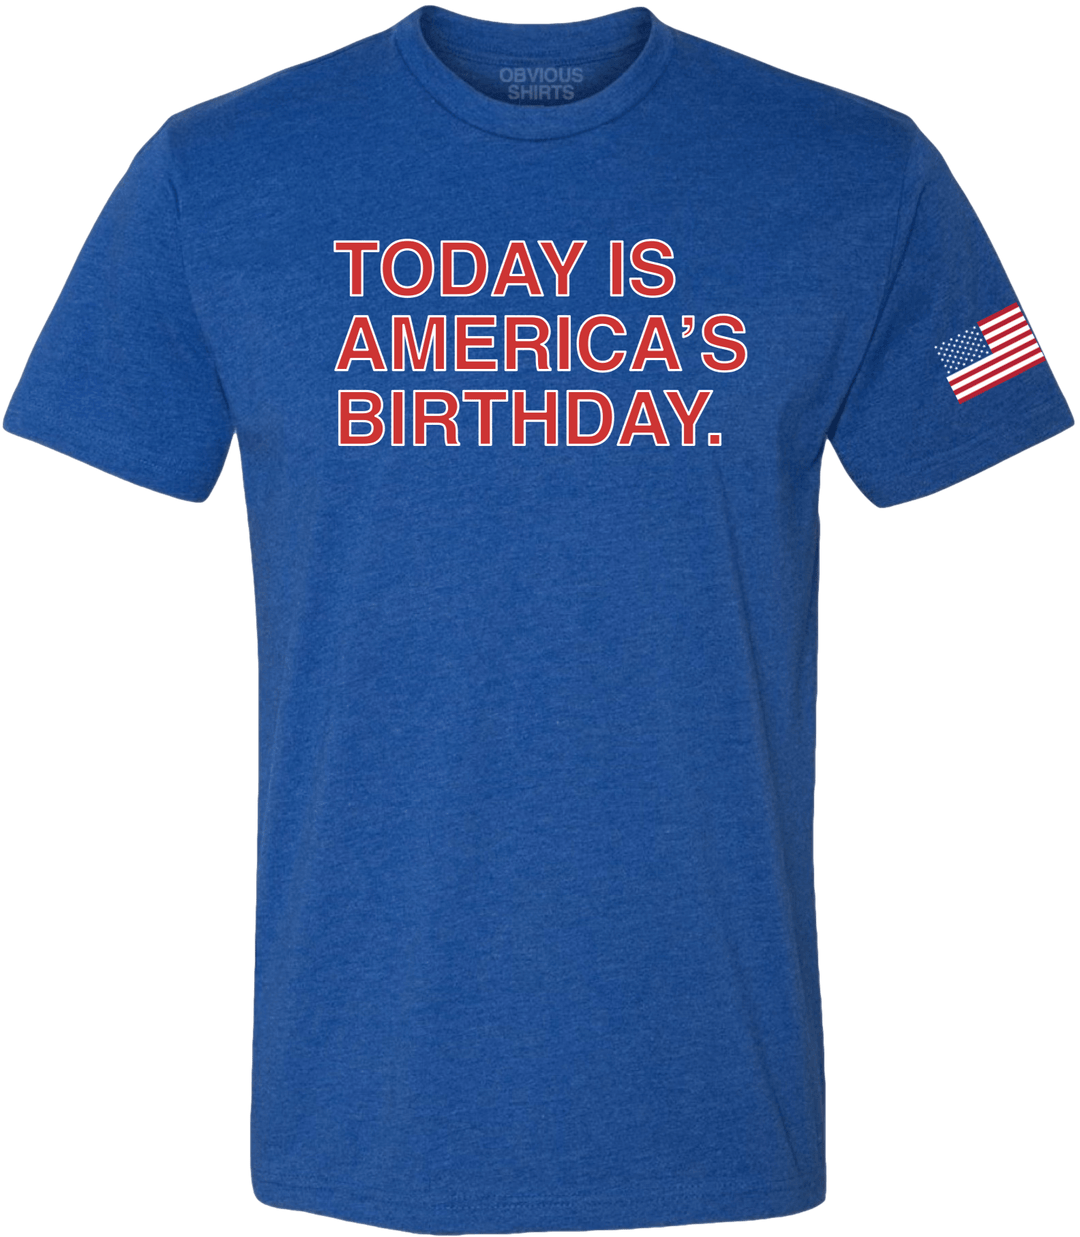 TODAY IS AMERICA'S BIRTHDAY. - OBVIOUS SHIRTS